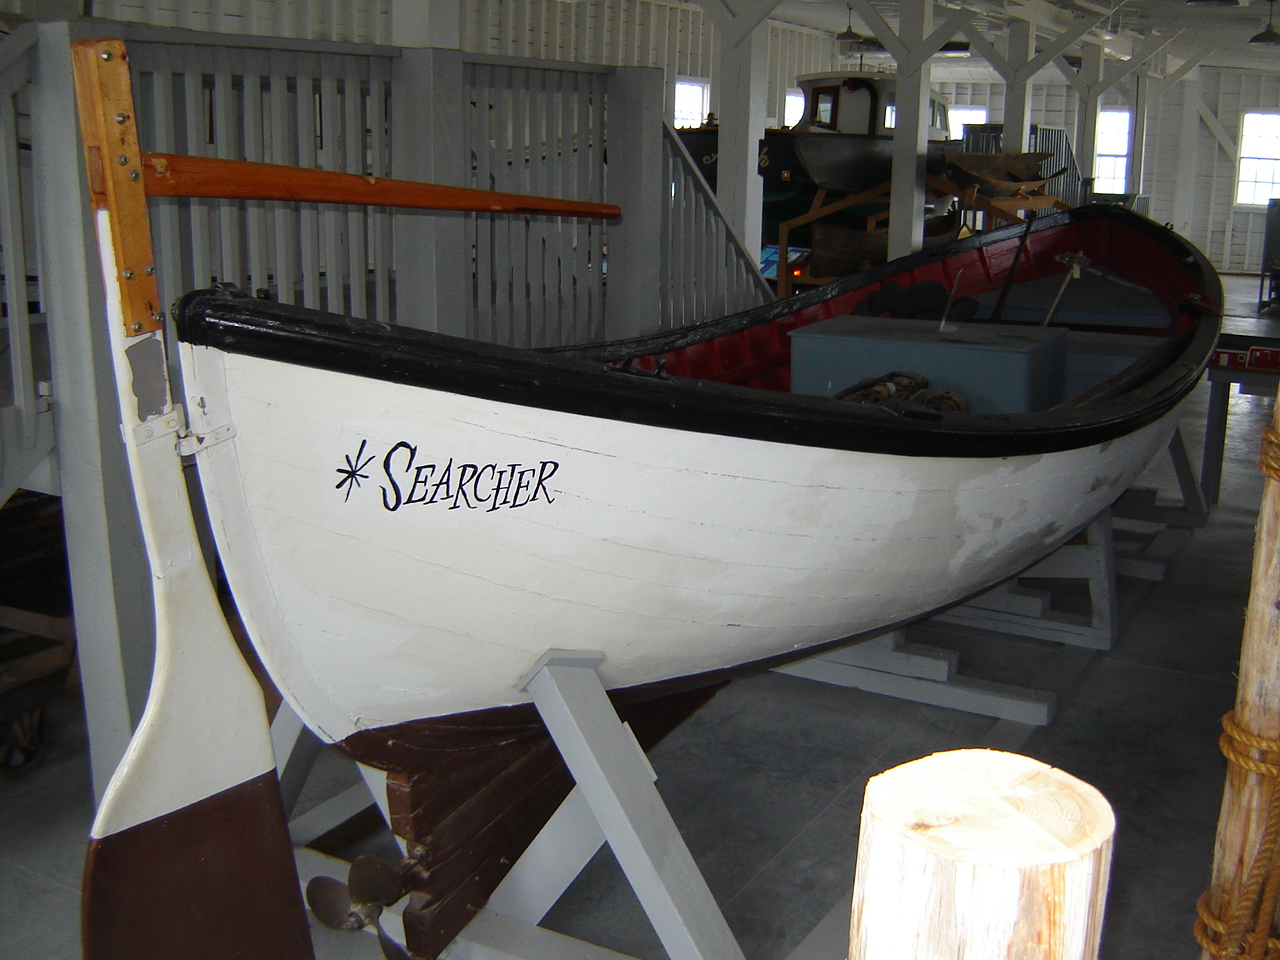 A vessels on display at the Cannery Boathouse Museum in Glen Haven